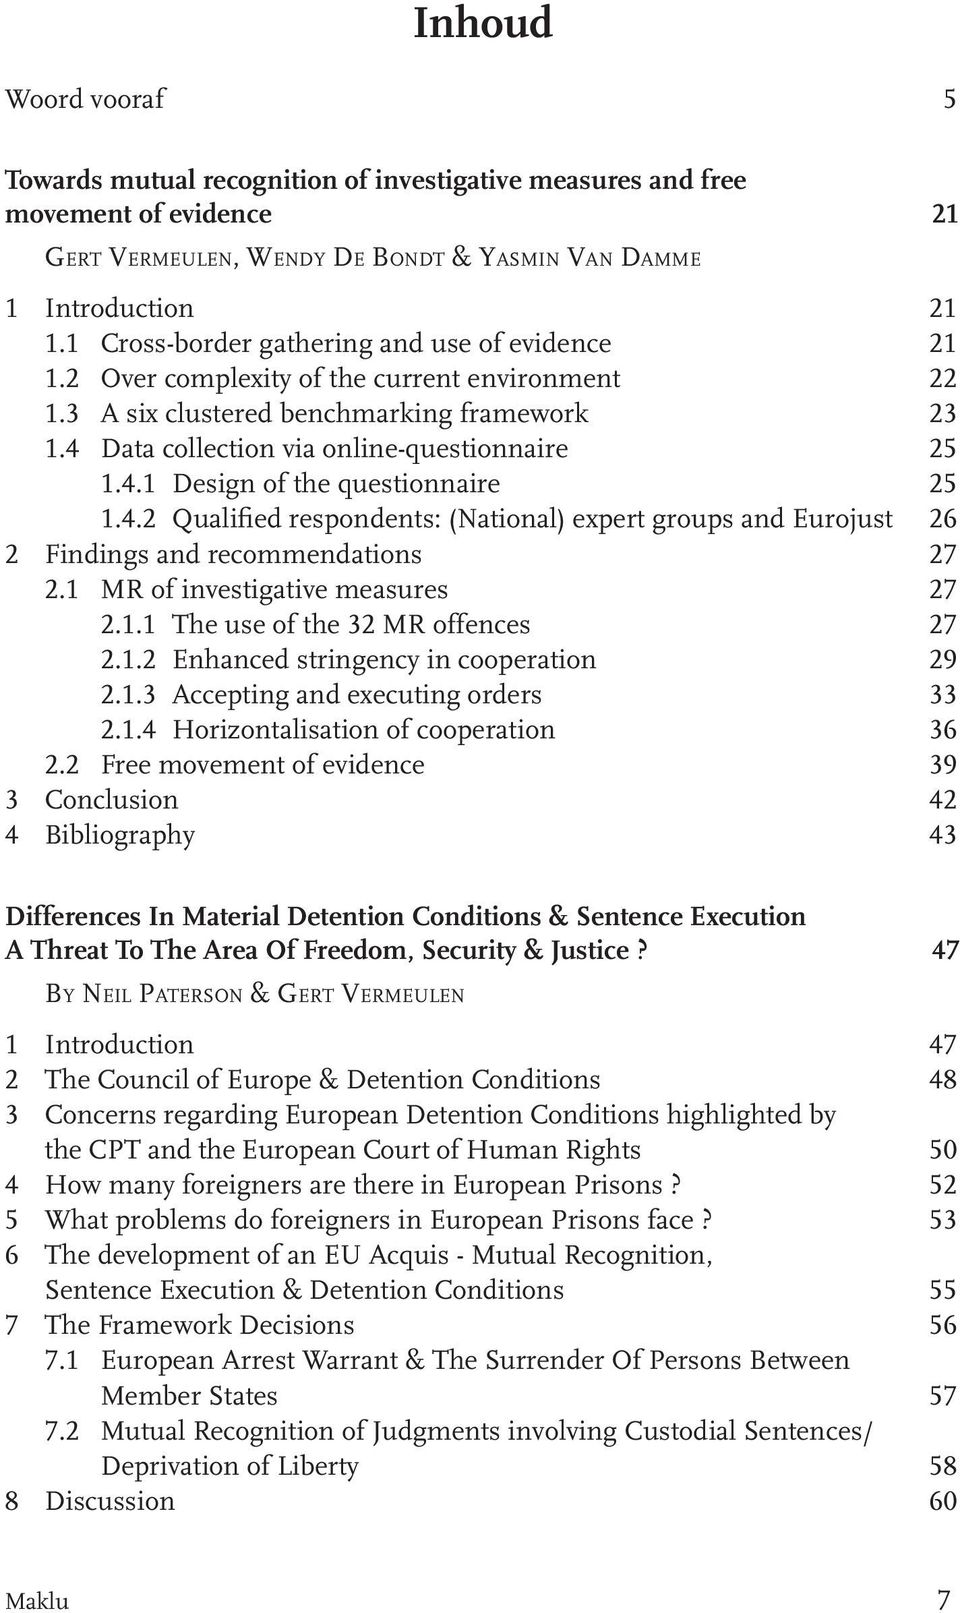 4.2 Qualified respondents: (National) expert groups and Eurojust 26 2 Findings and recommendations 27 2.1 MR of investigative measures 27 2.1.1 The use of the 32 MR offences 27 2.1.2 Enhanced stringency in cooperation 29 2.